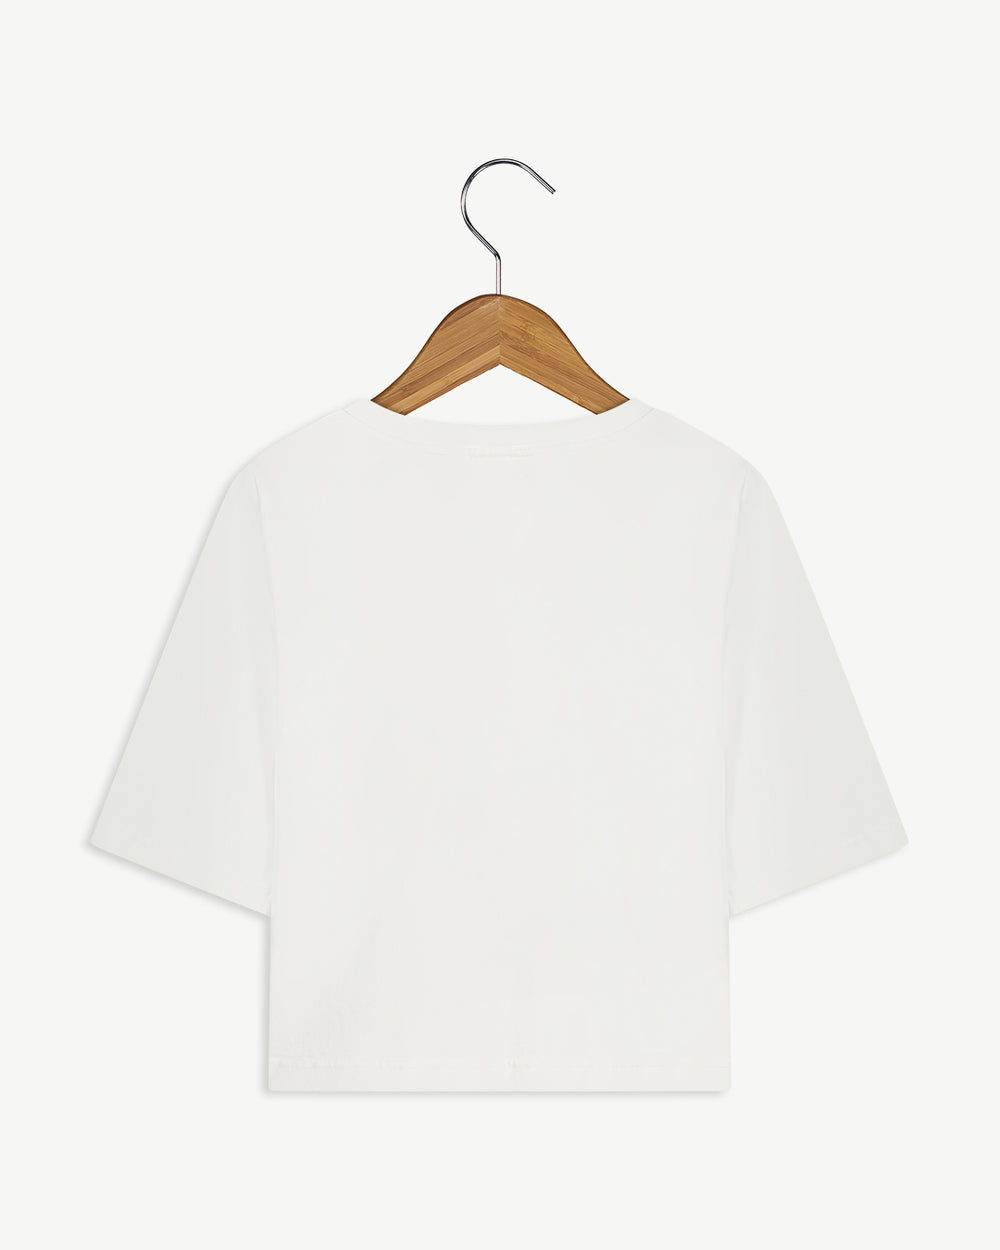 New Optimist womenswear Rondine | T-shirt with elbow-length sleeves T-shirt OPTIC WHITE